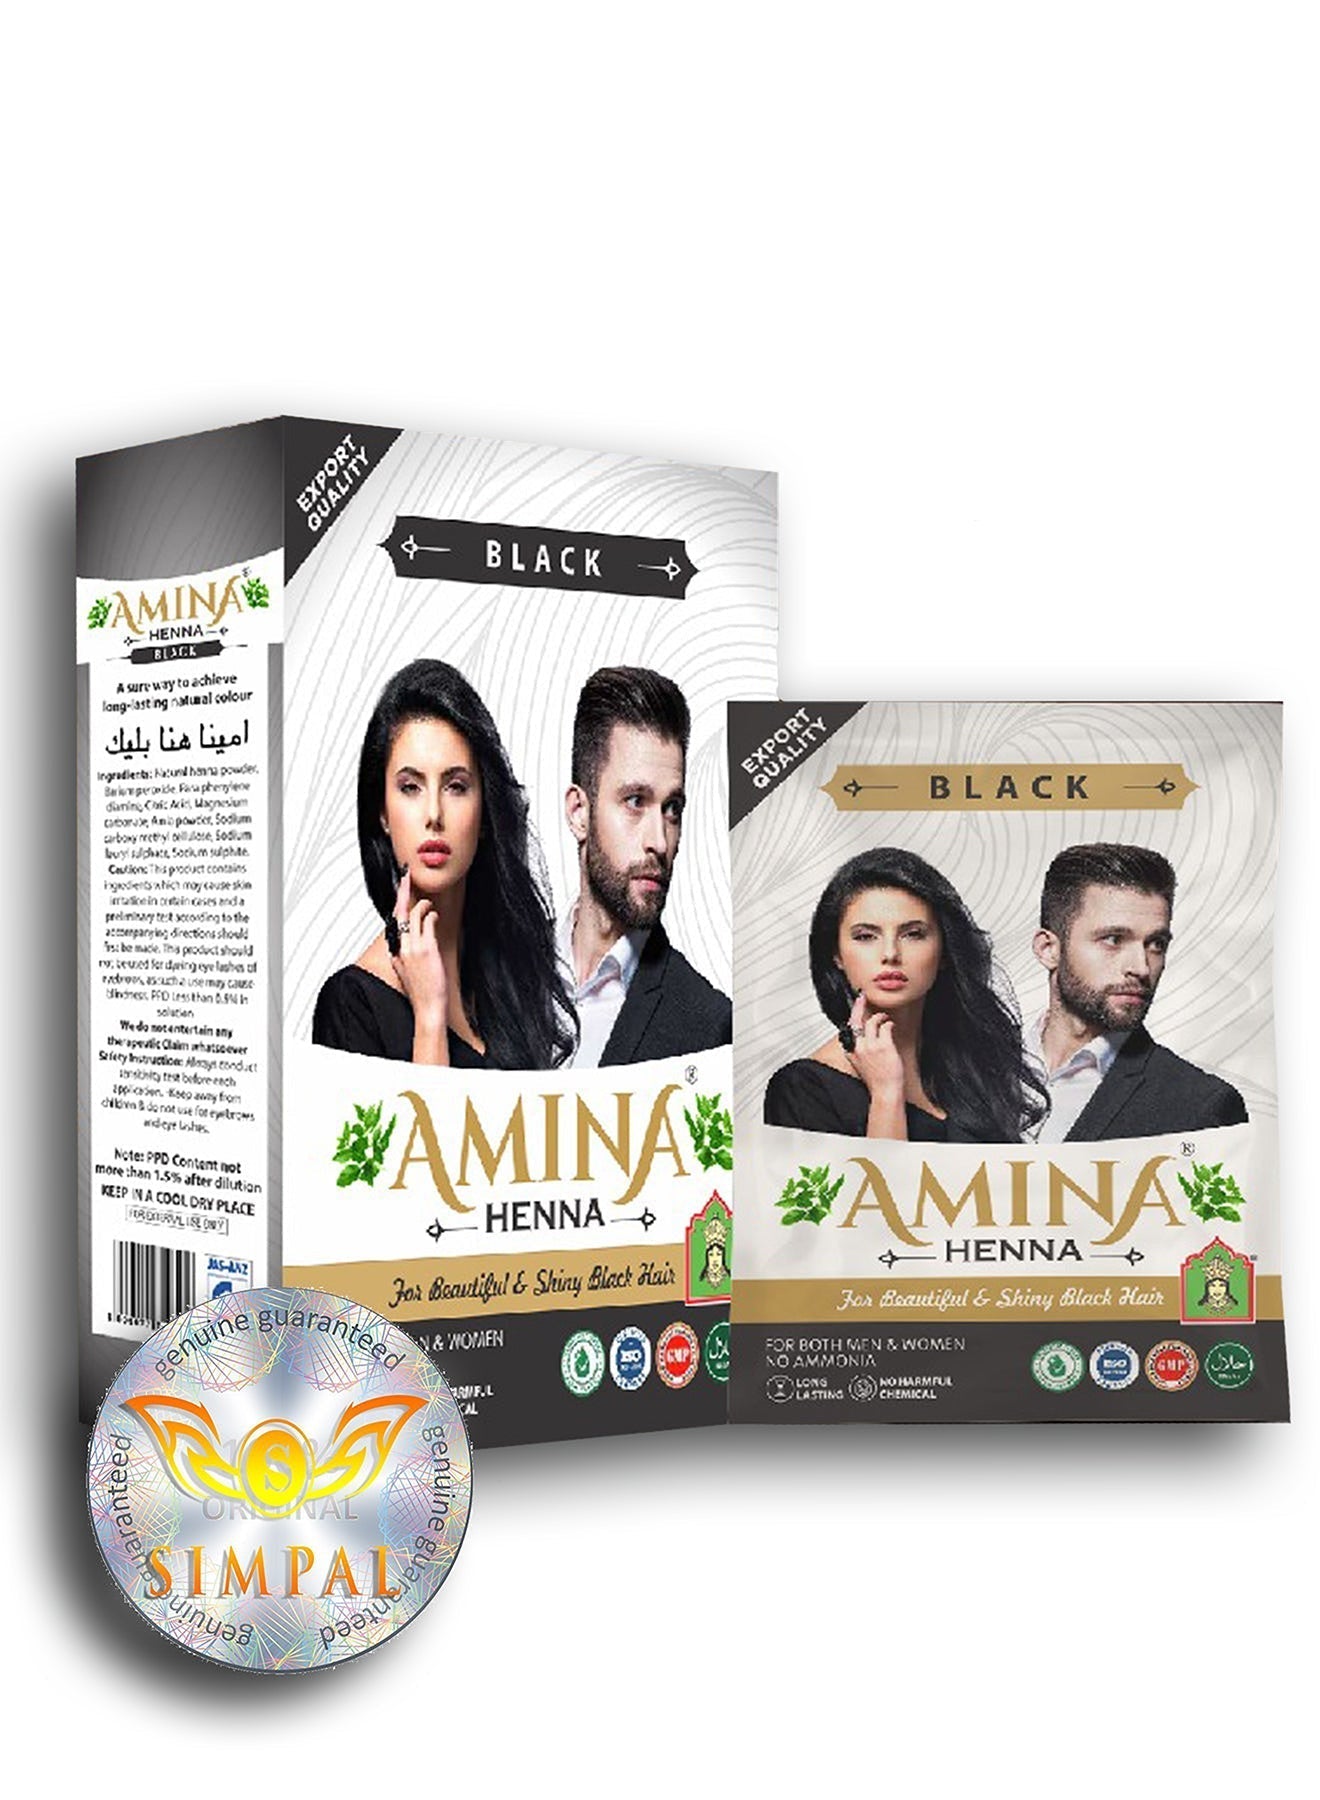 Amina Henna Natural Color Black 10g x 6 pouch Value Pack of 3 